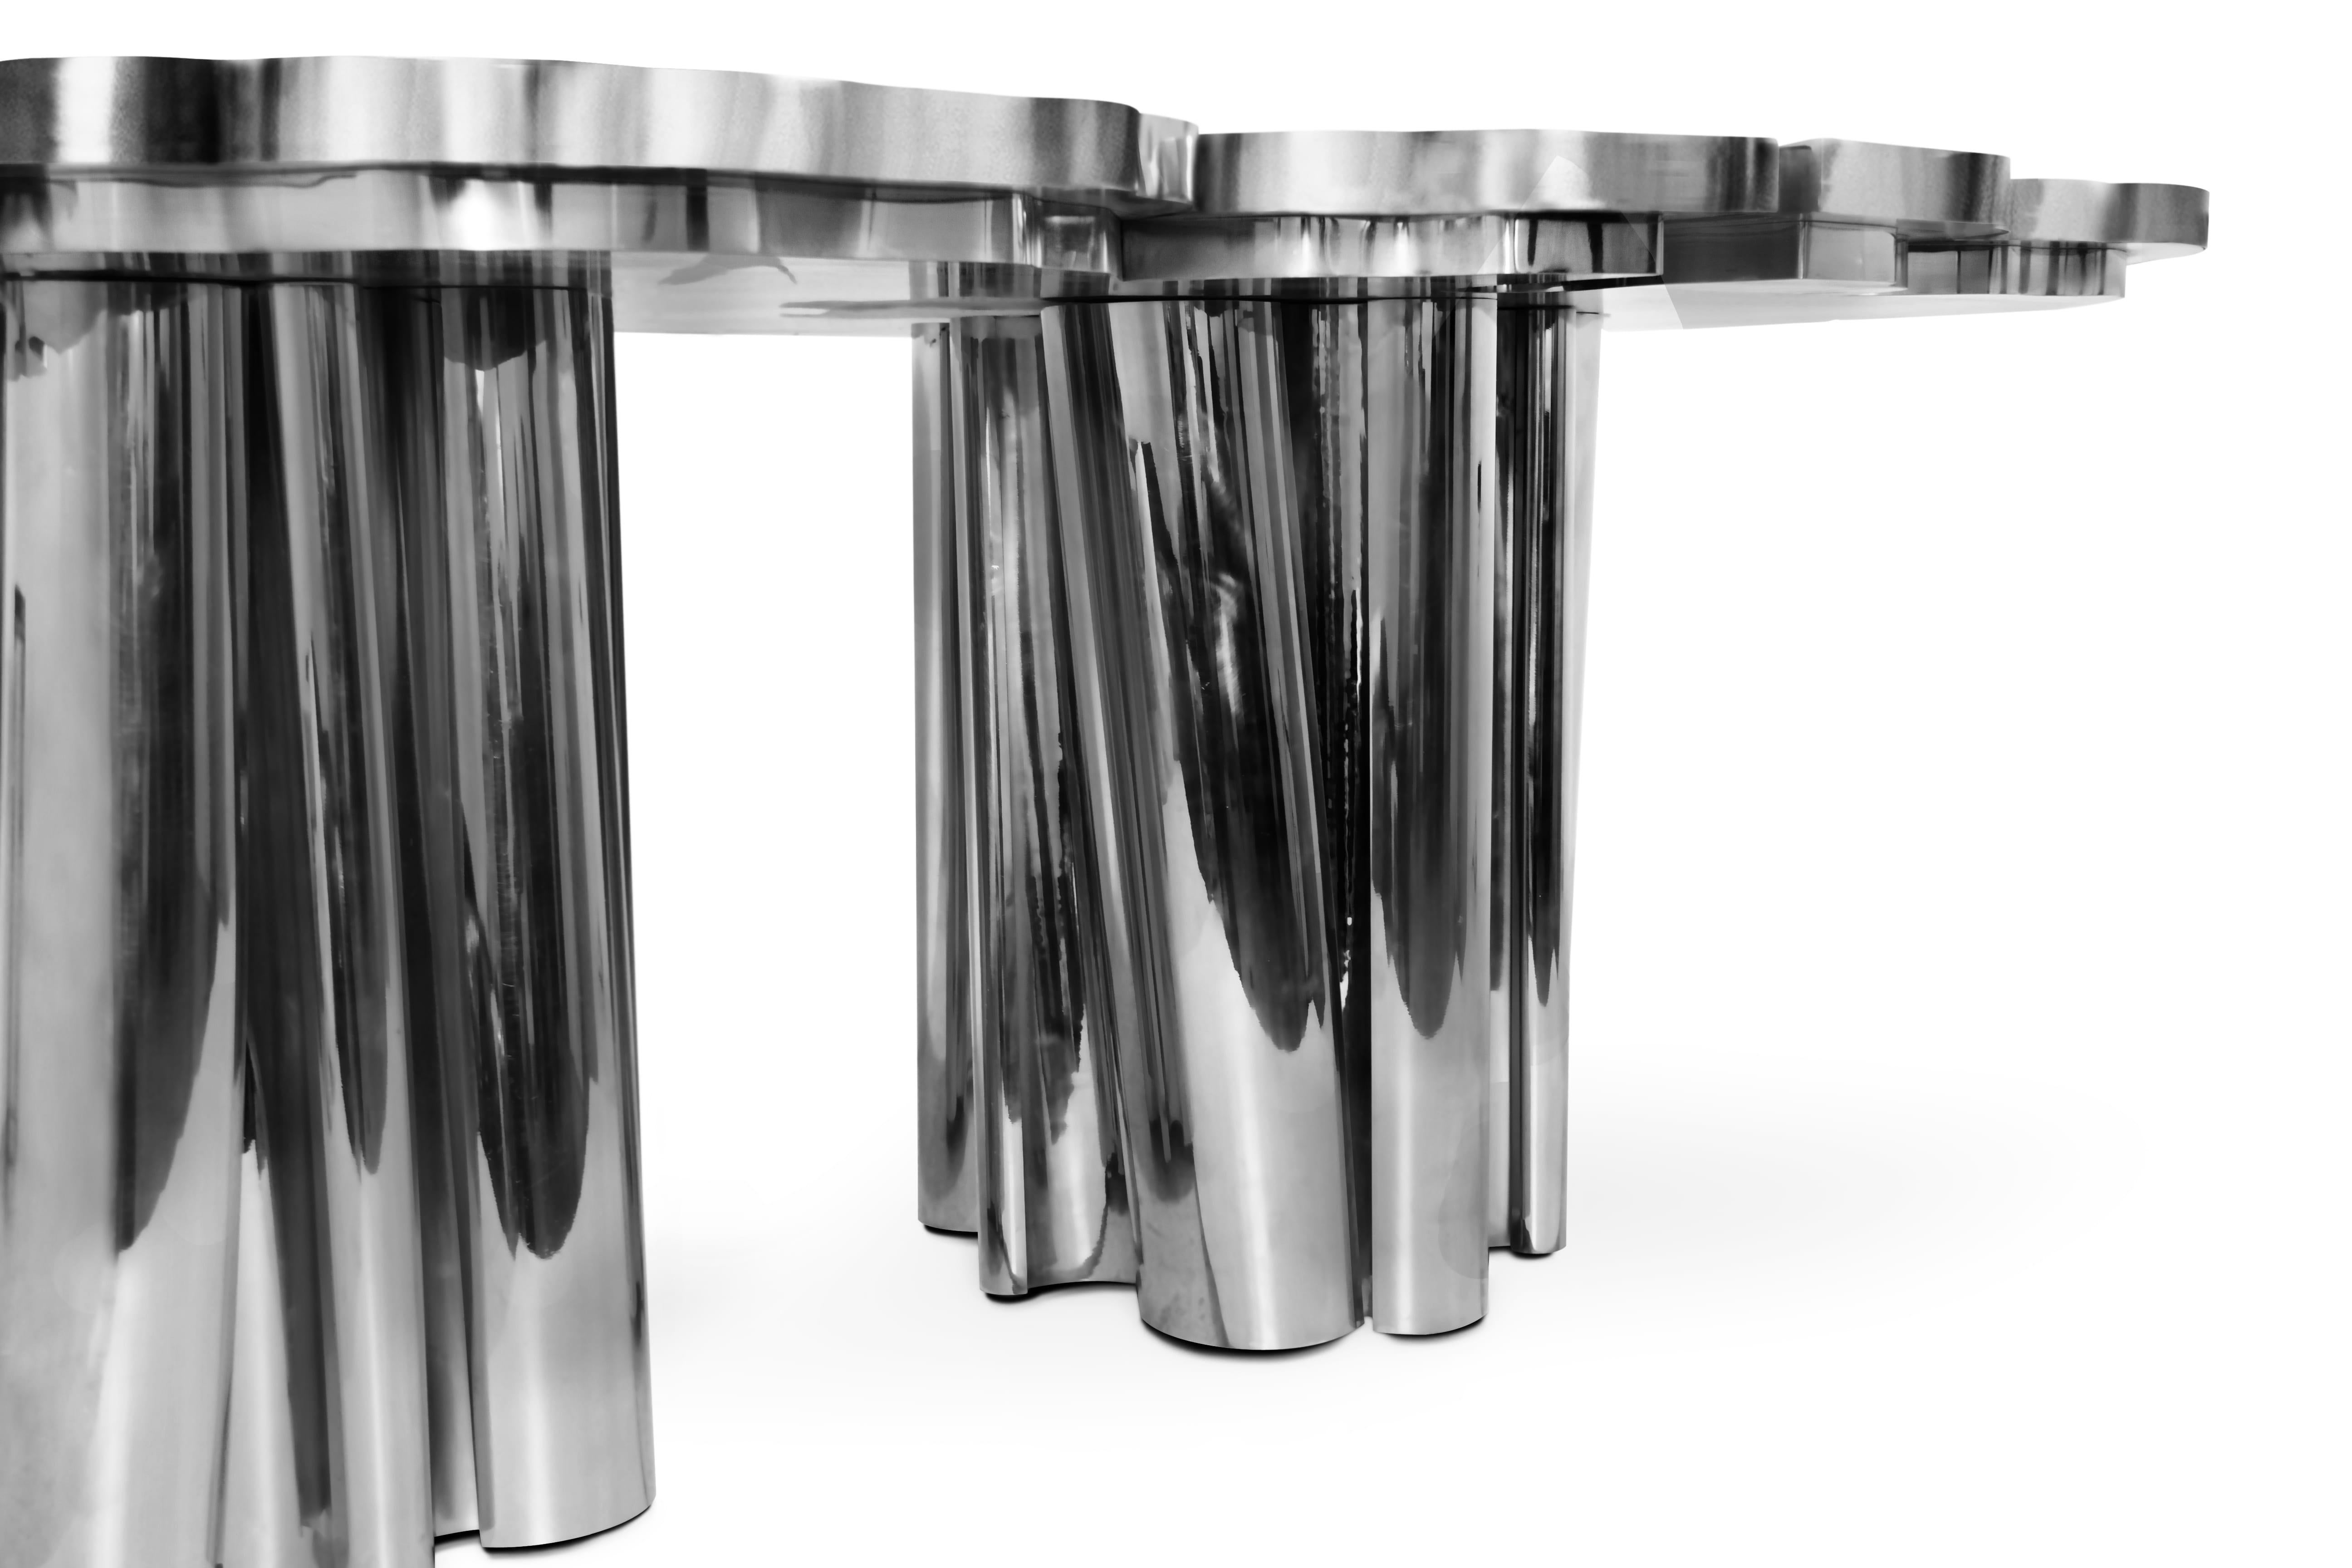 The Fortuna Dining Table is a shimmering statement piece that unites Boca do Lobo's one of a kind design aesthetic and passion for Gold. Representing the essence of empowerment, sophistication, mystics, and enticement, the Fortuna features a one of